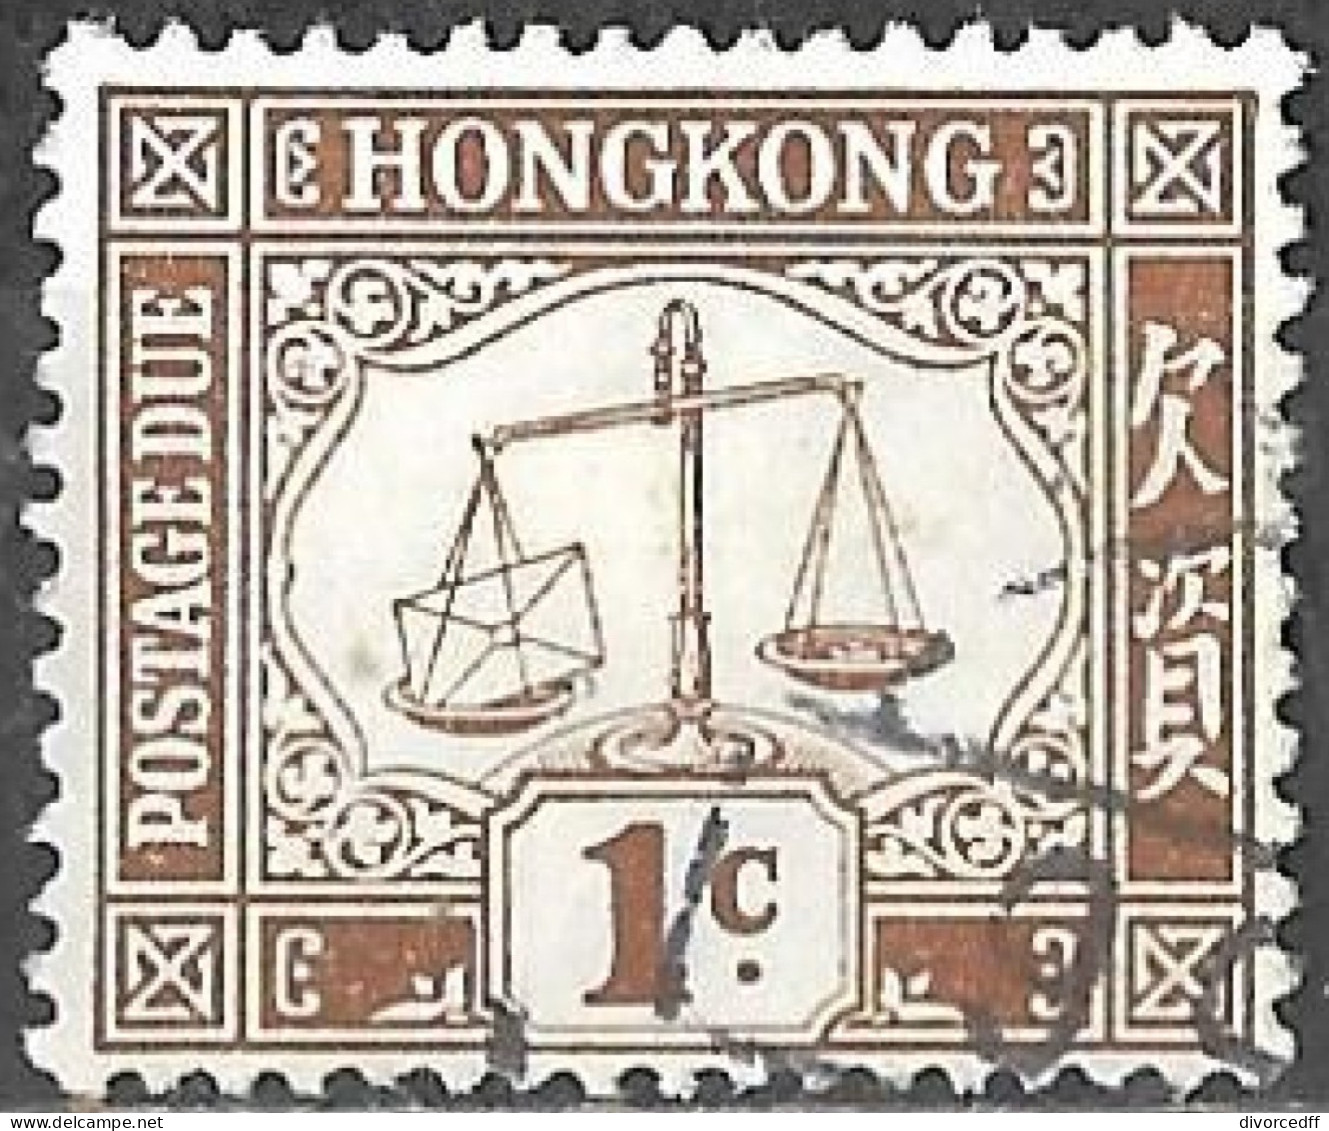 Hong Kong Used Postage Due Stamp Scales Showing Letter Overweight 1 Cent [WLT283] - Strafport